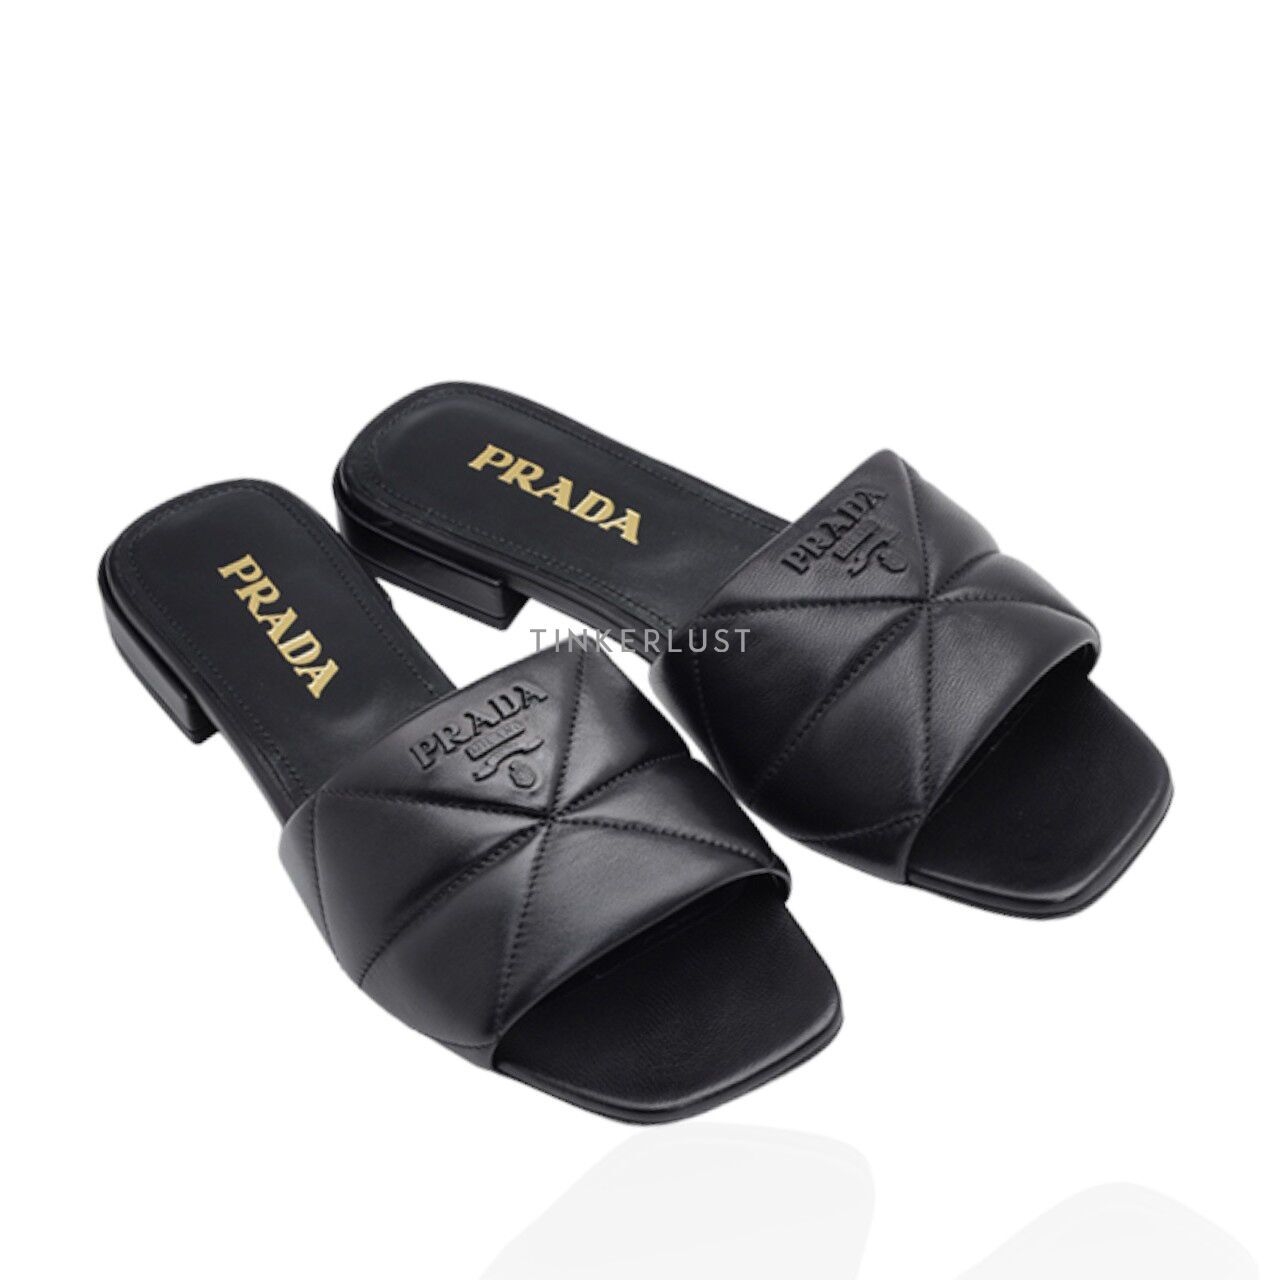 PRADA Women Logo Quilted Sandals in Black Nappa Leather